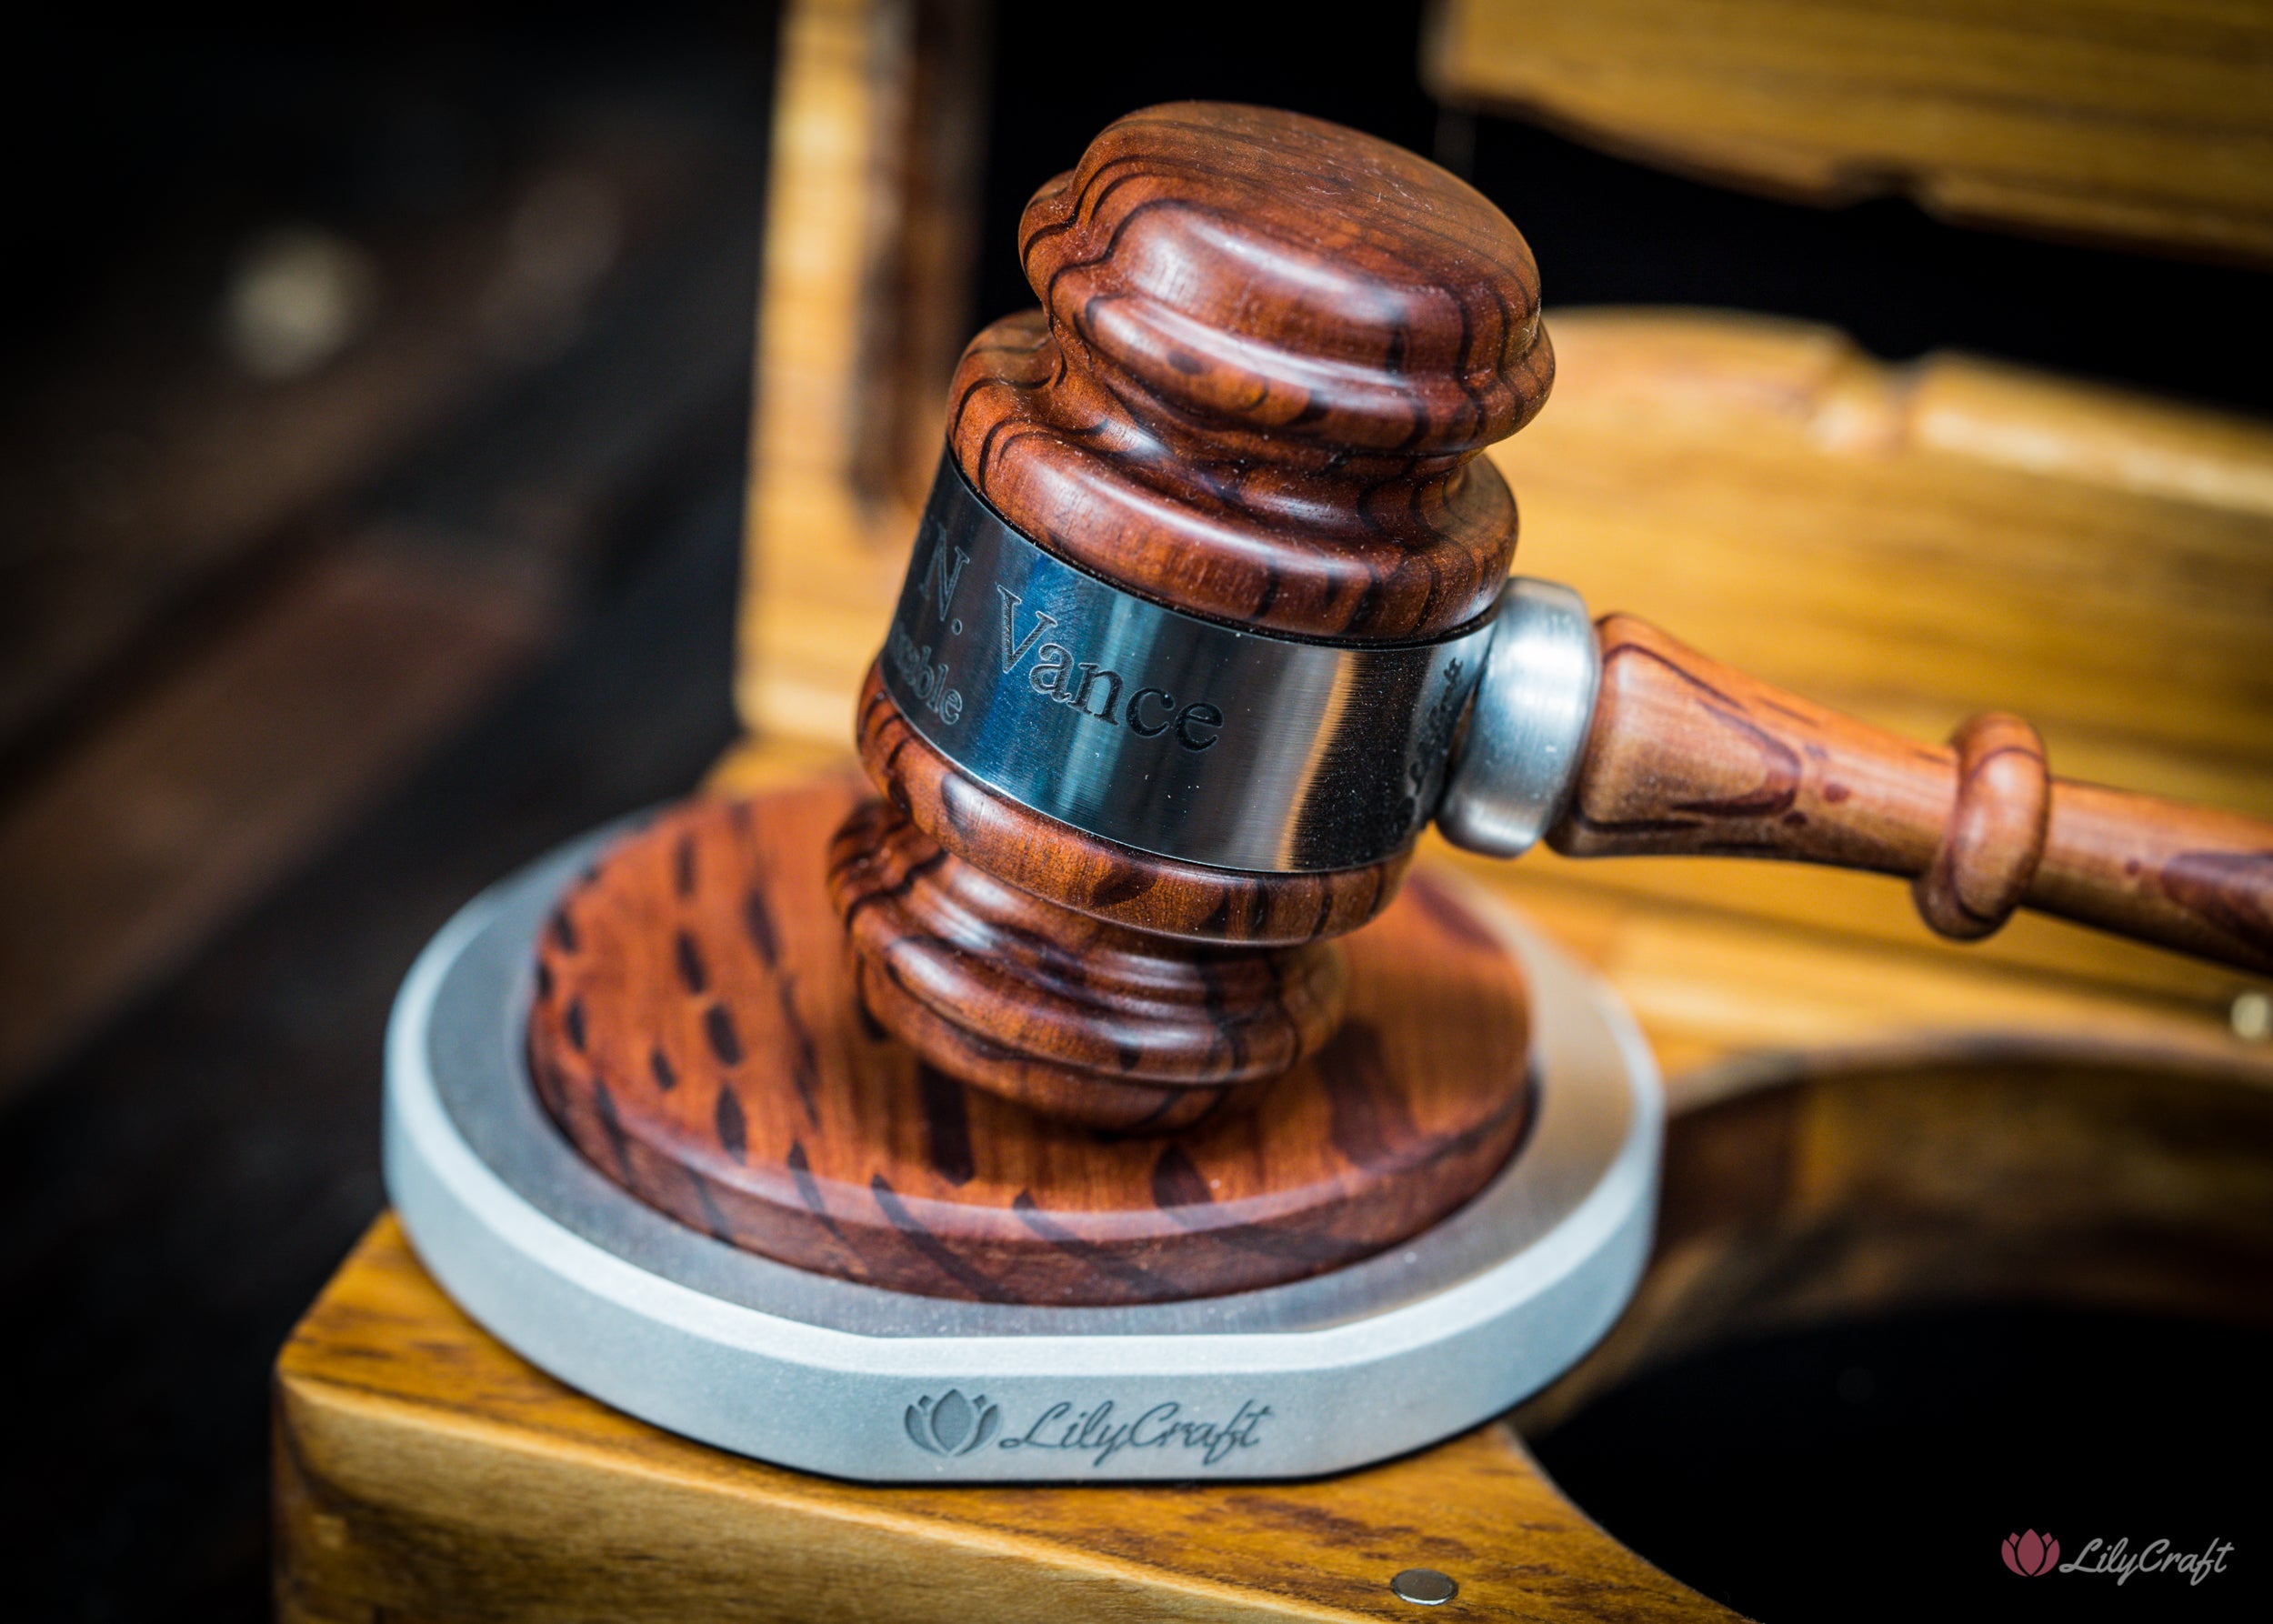 Quality Gavel Designed for Supreme Court Justices